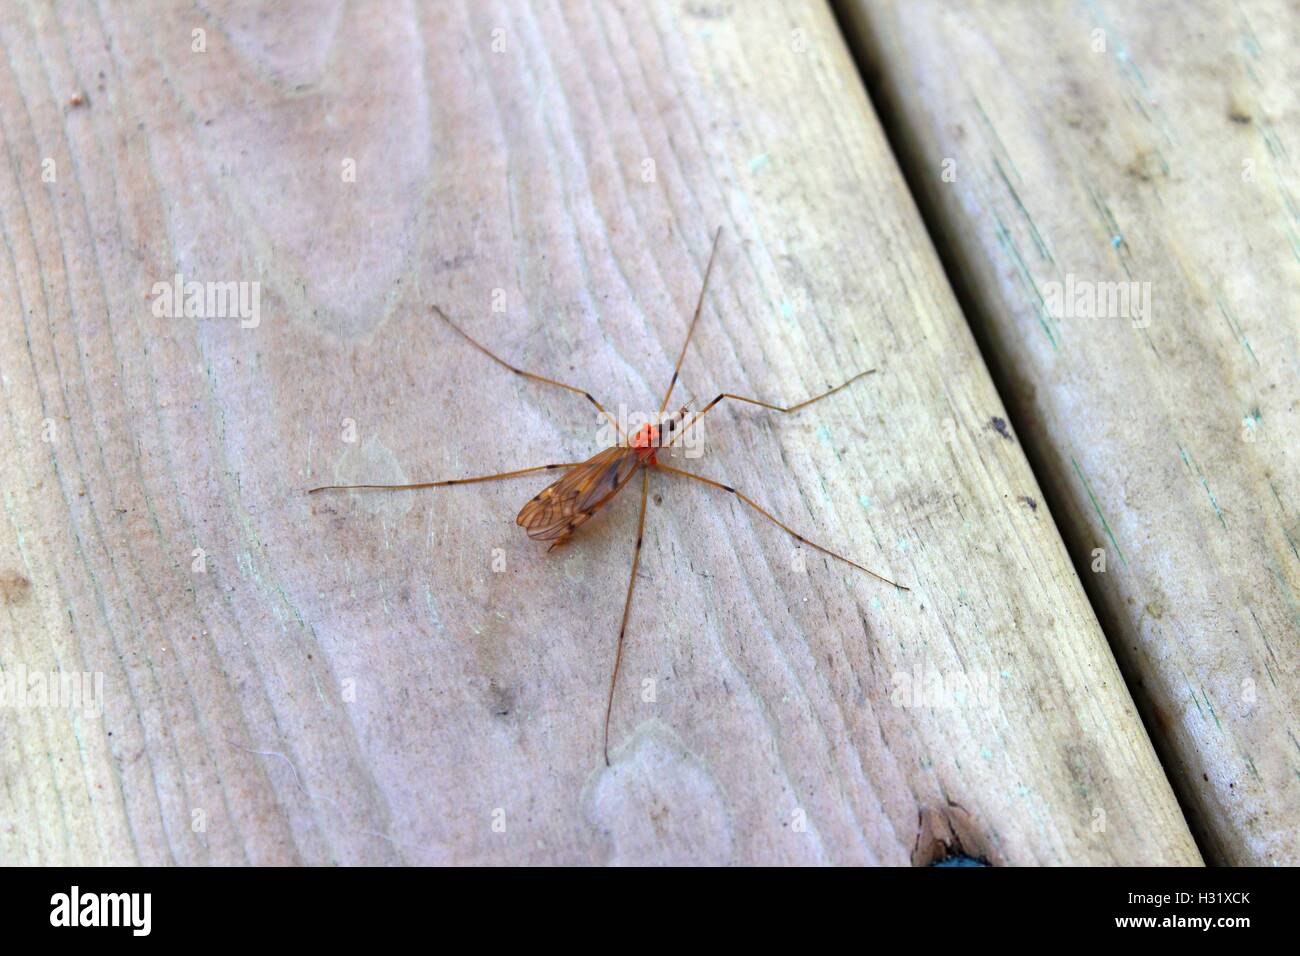 Crane Fly With Orange Eggs On Her Back Stock Photo